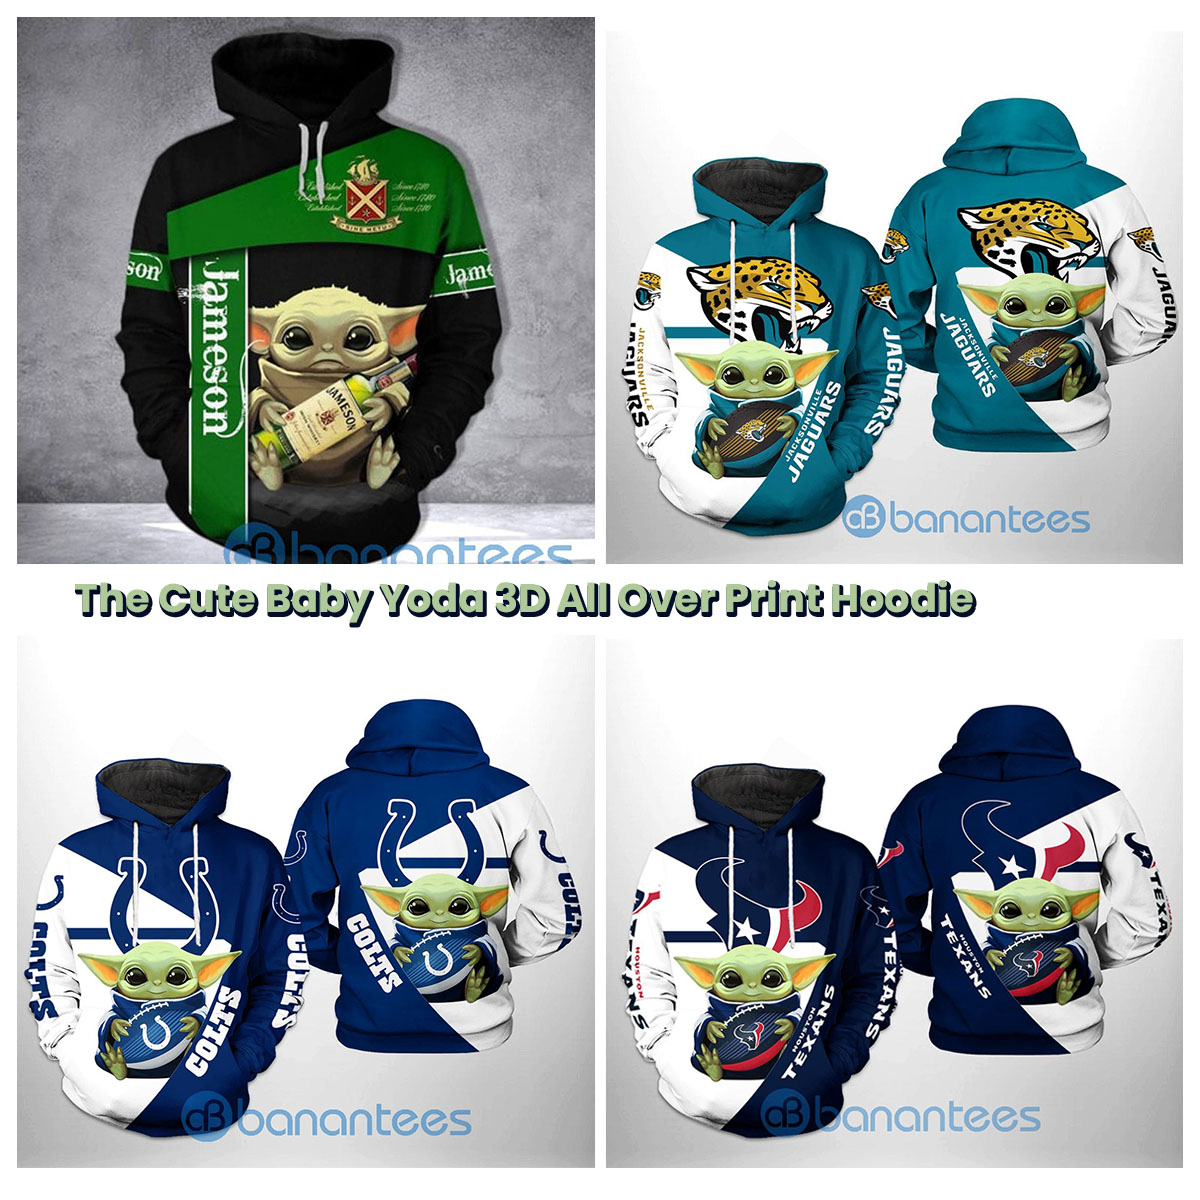 The Cute Baby Yoda 3D All Over Print Hoodie